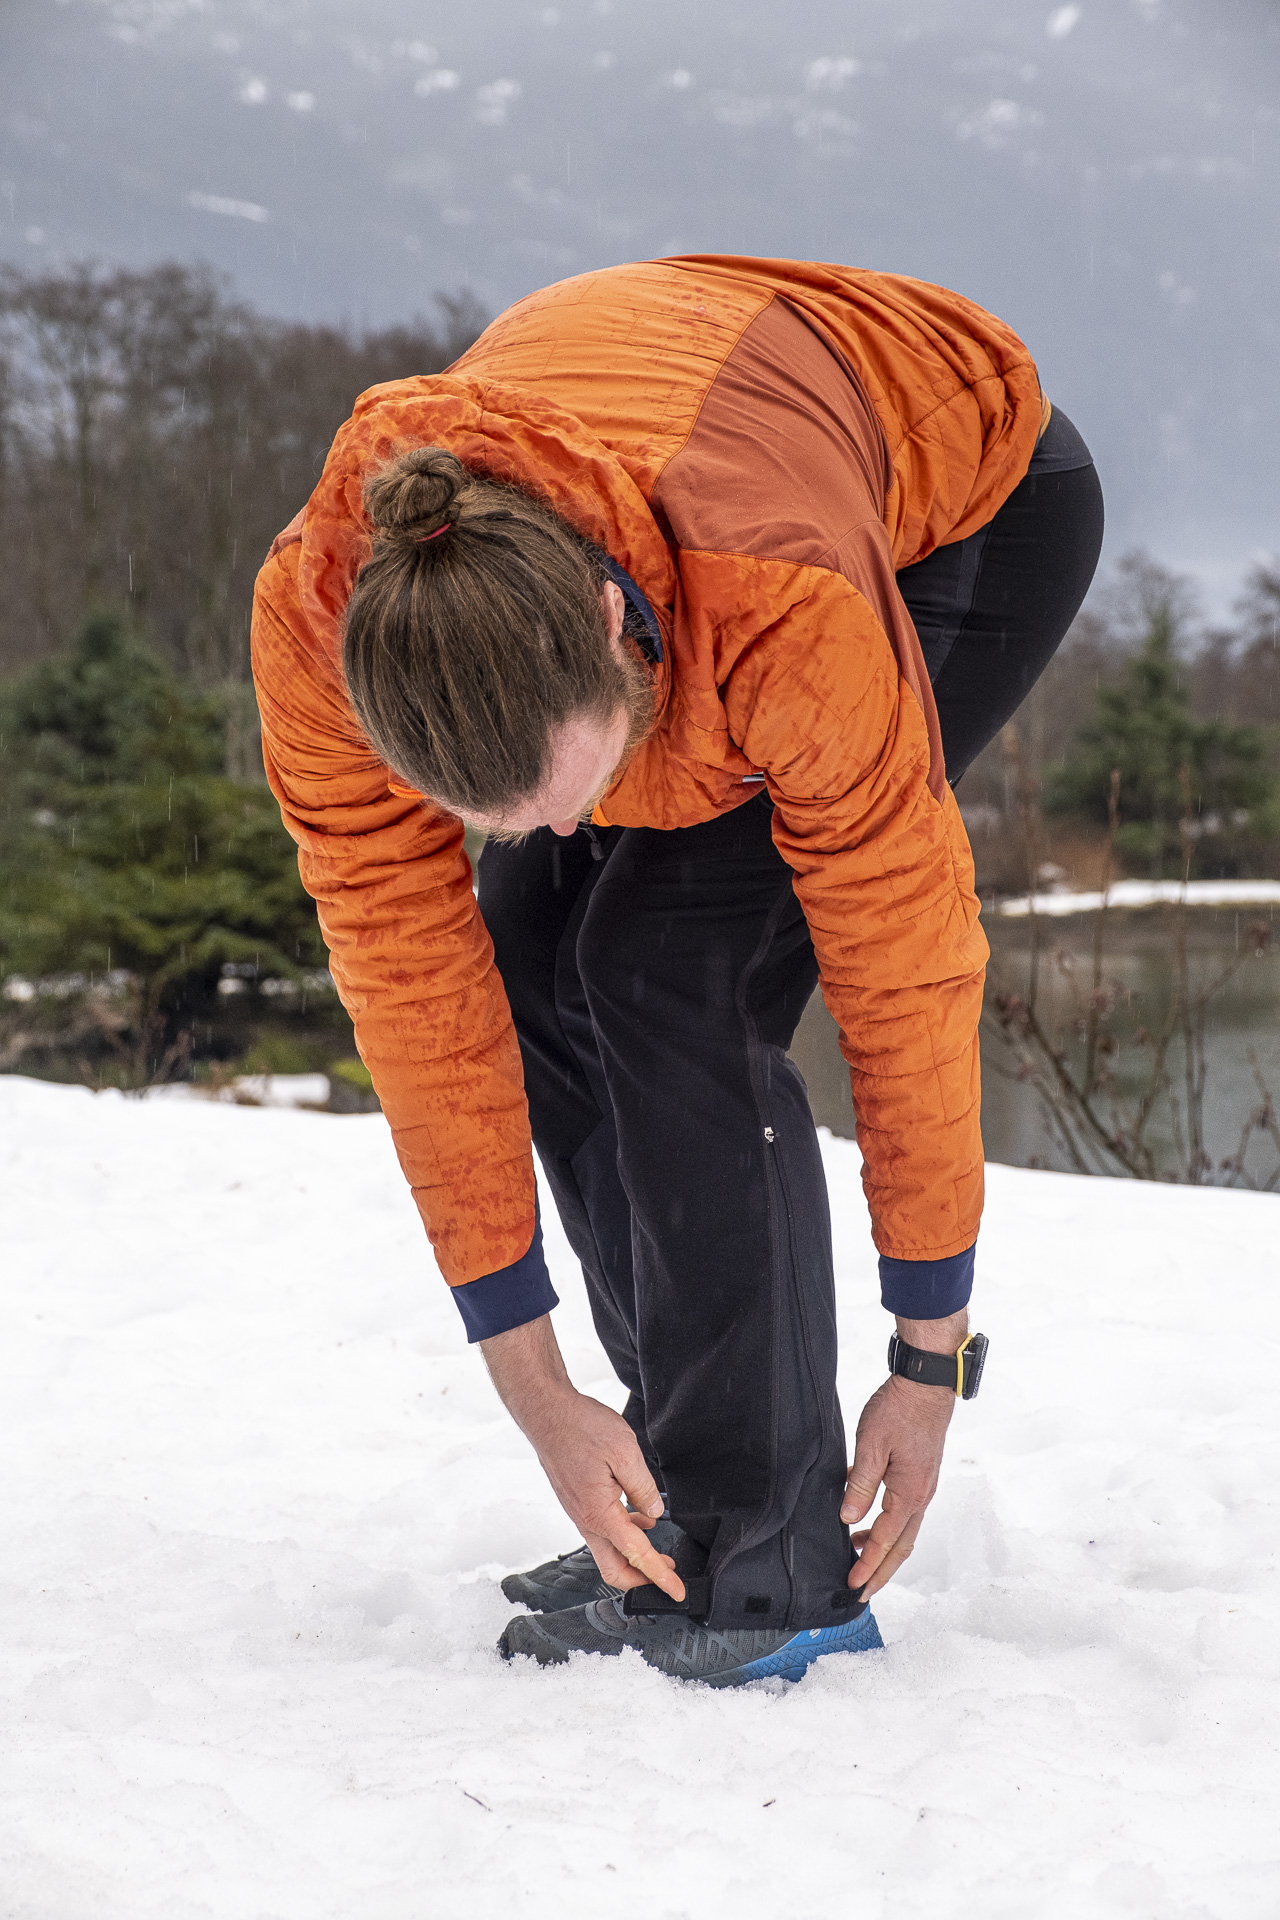 A Guide's review of the Mammut Zinal Guide Pant